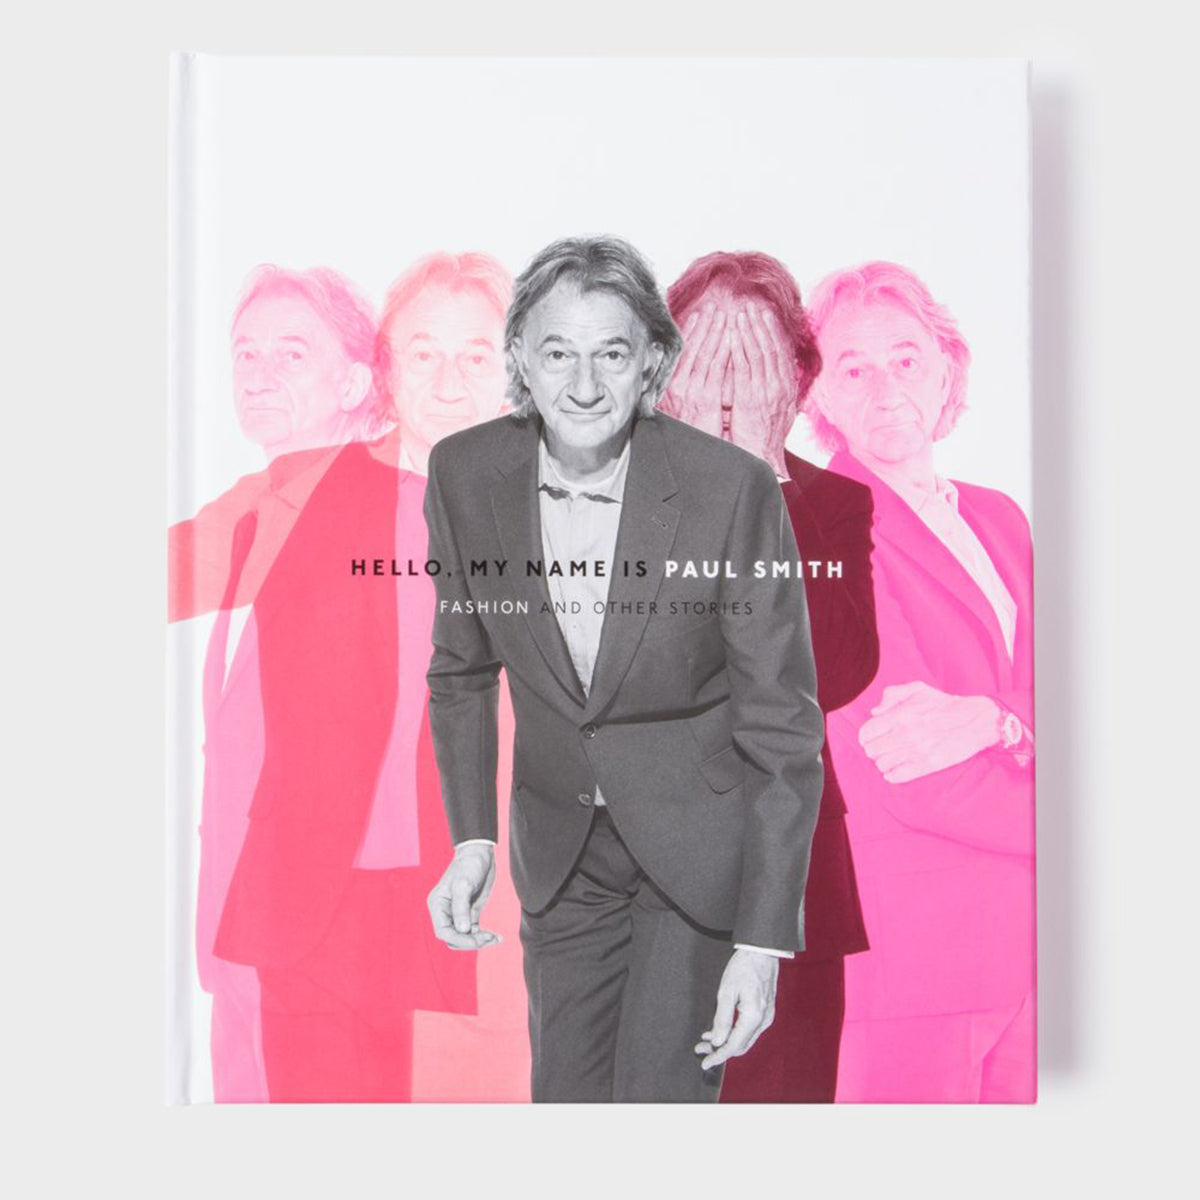 Hello, My Name is Paul Smith: Fashion and Other Stories